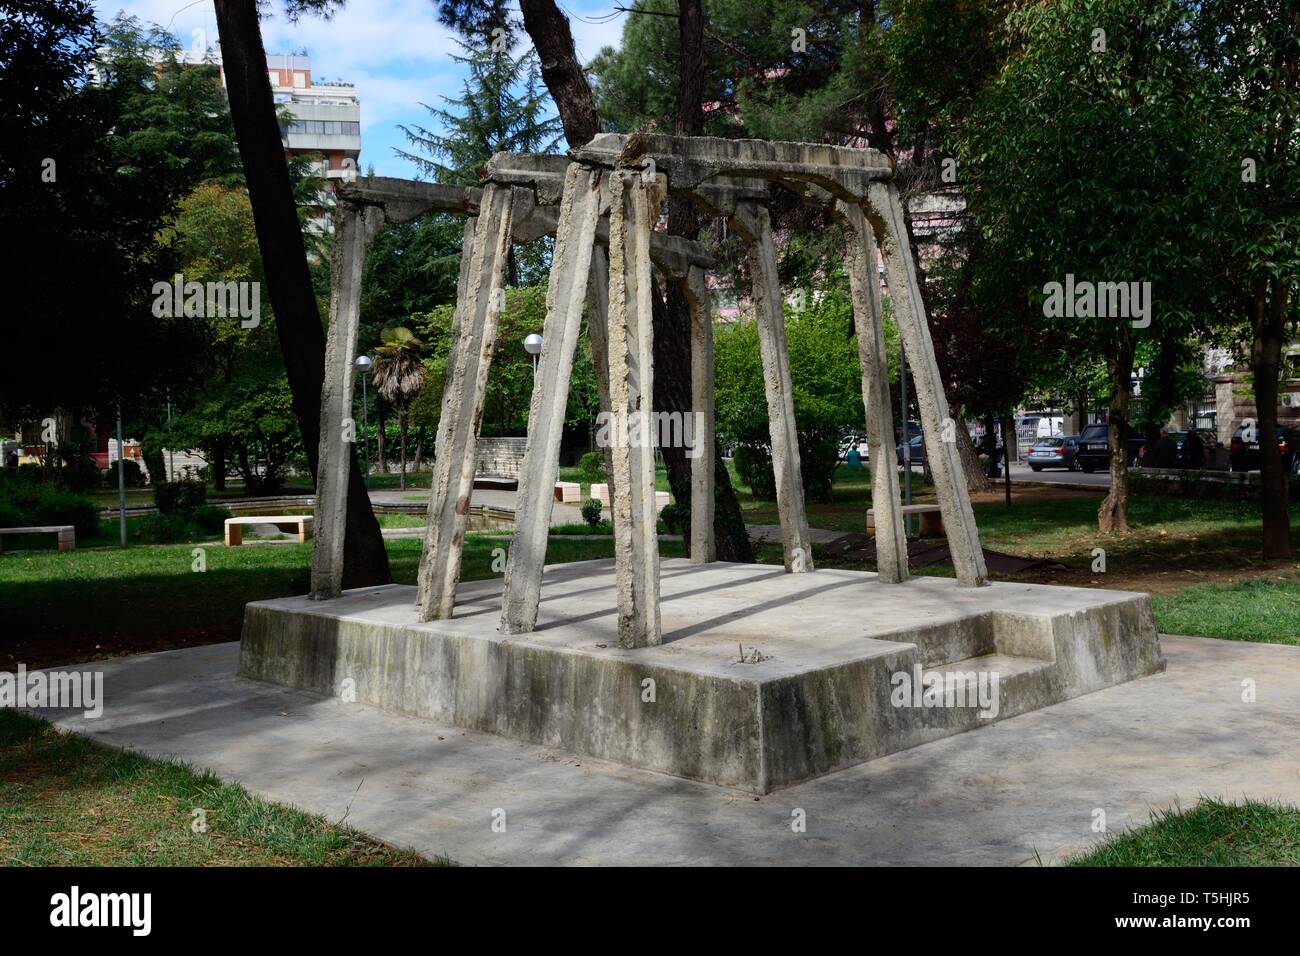 Concrete supports from the gallery of the notorious mine of Spac a forced labour camp for political prisoners from 1968 - 1990 Tirana Albania Stock Photo